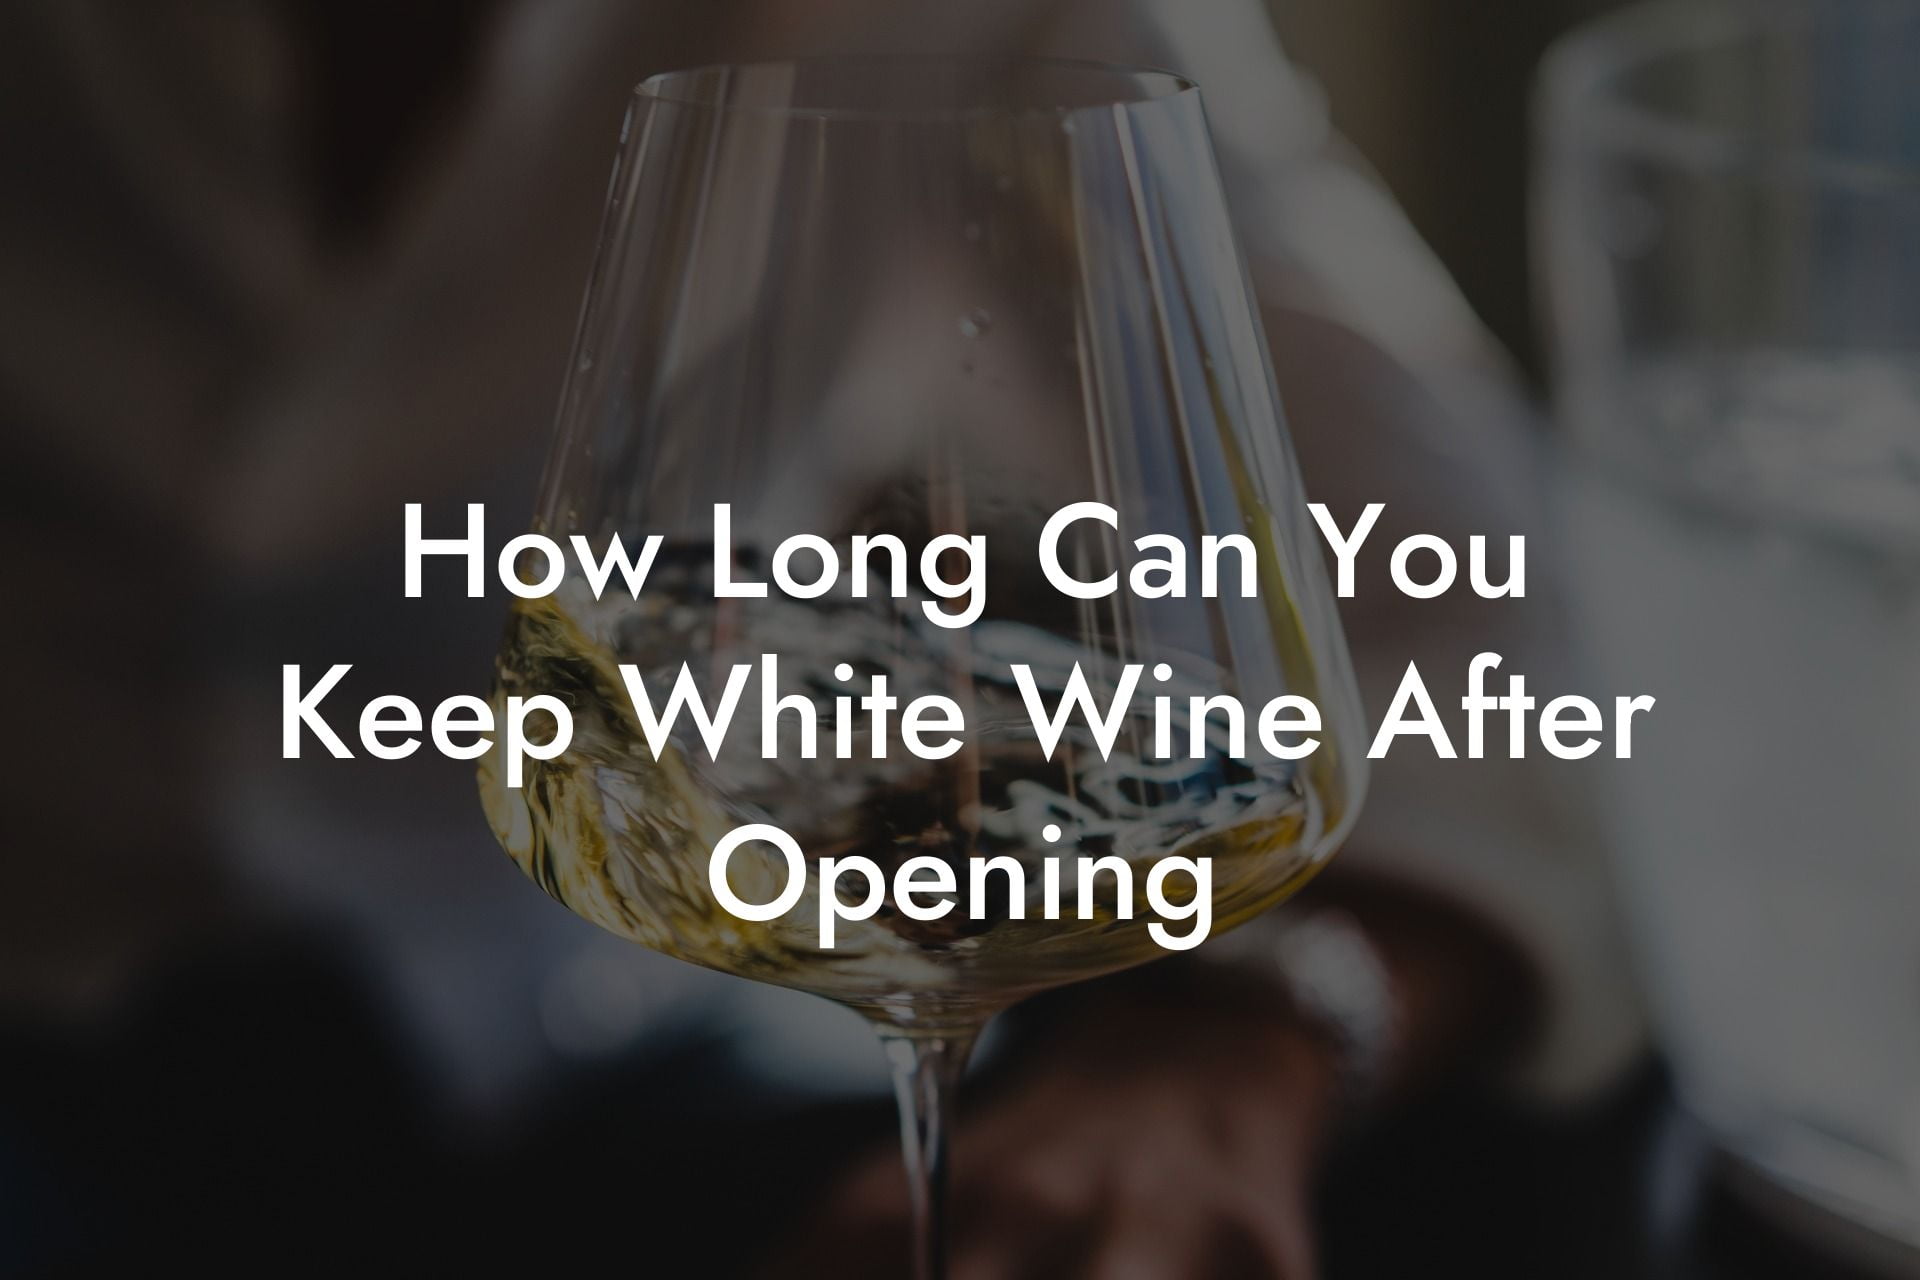 How Long Can You Keep White Wine After Opening